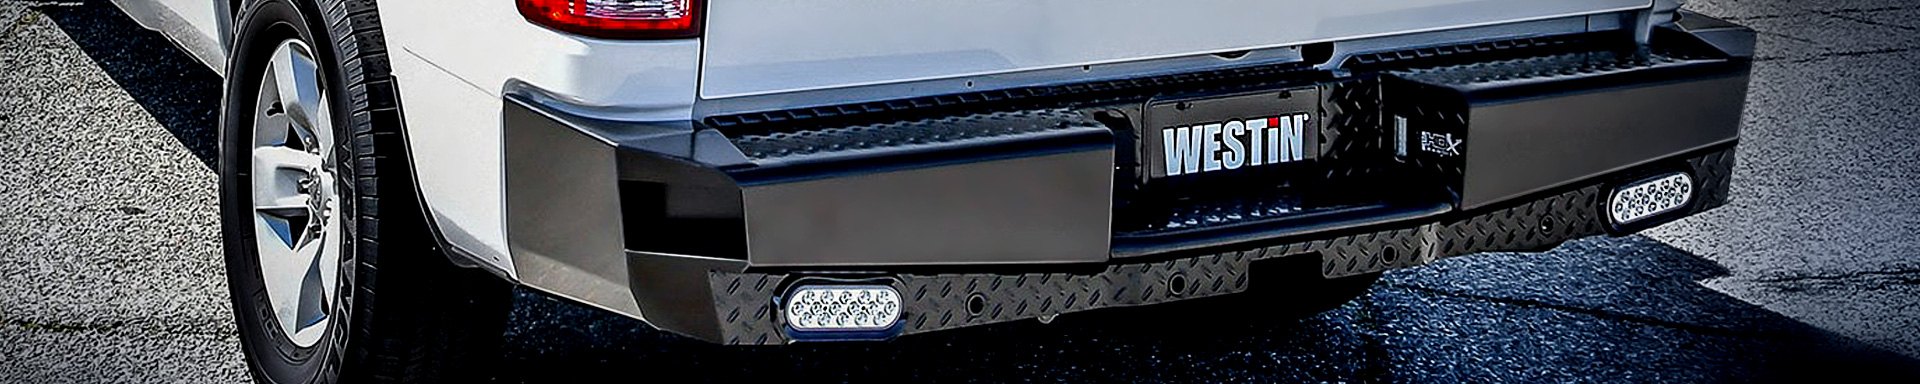 Meet New Westin HDX Bandit Rear Bumpers For Dodge, Ford & Chevy Trucks